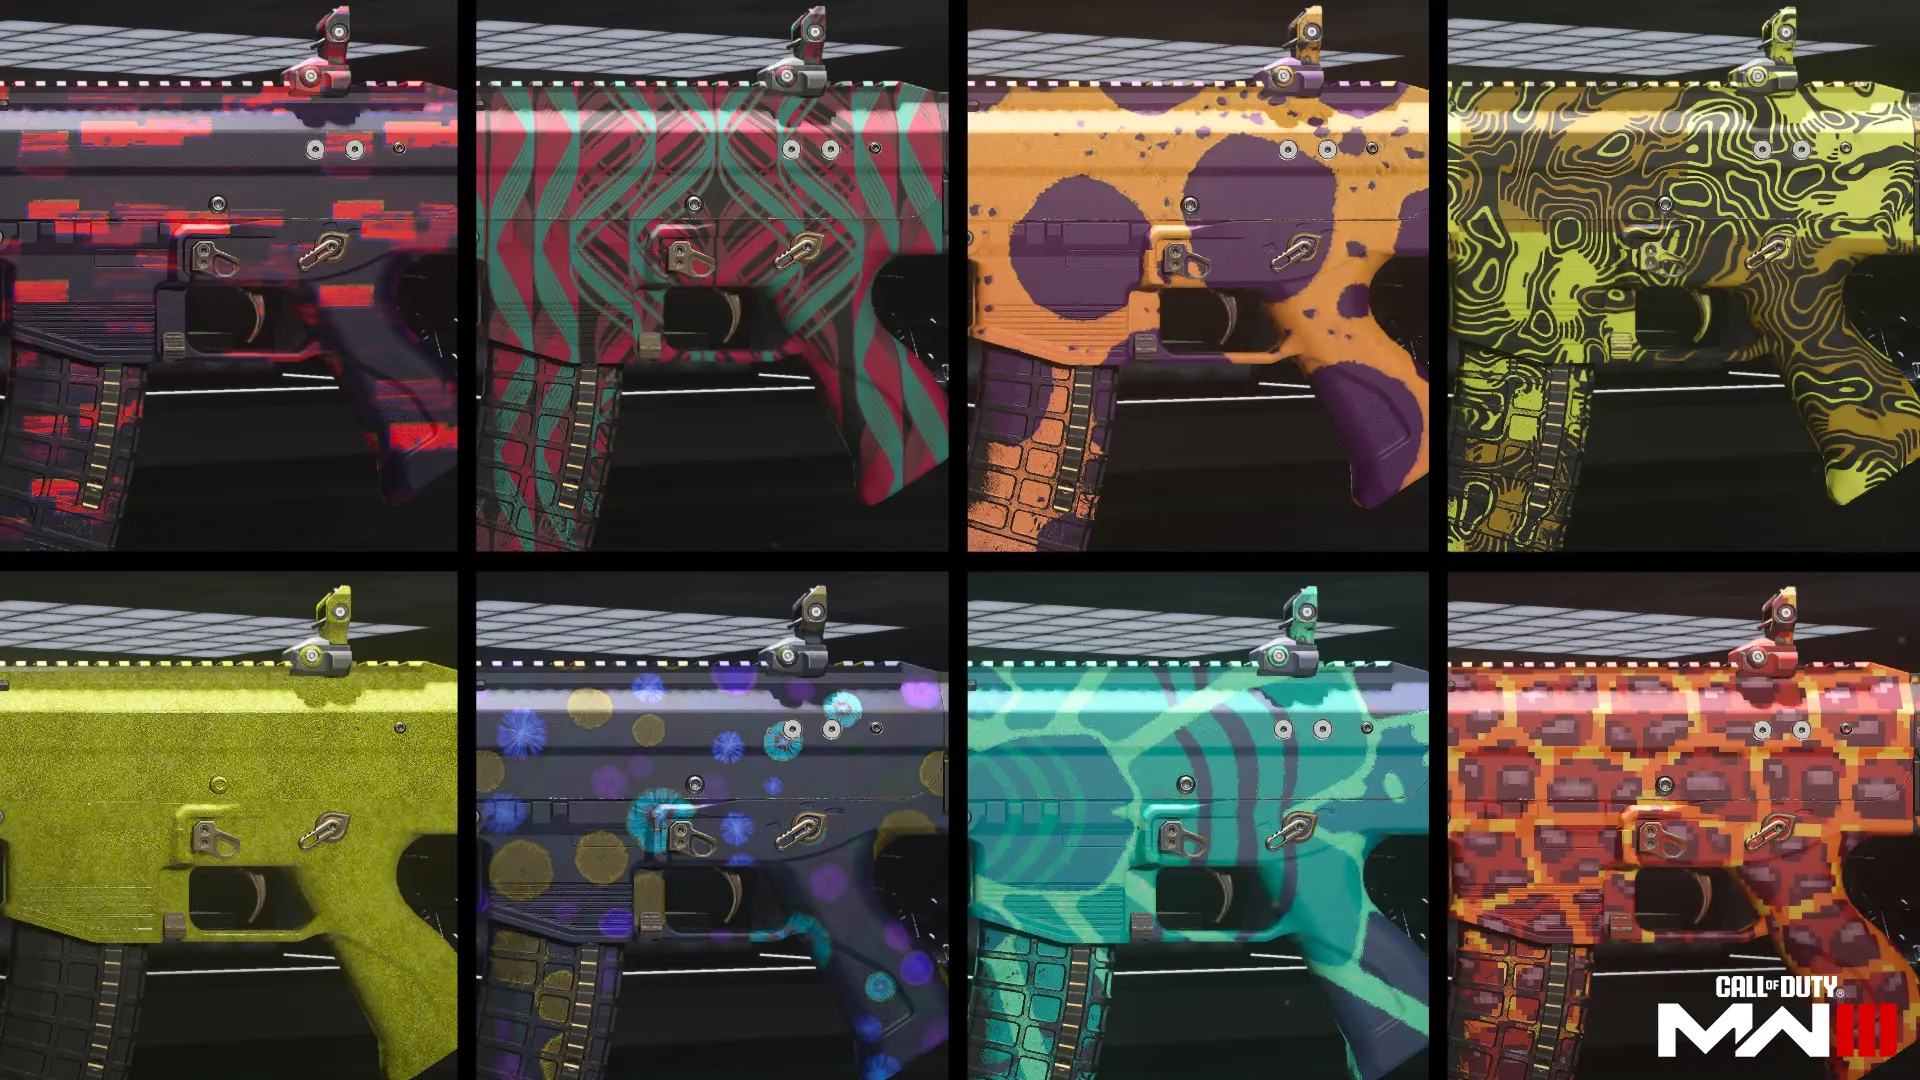 An image of some base camos in MW3 multiplayer.